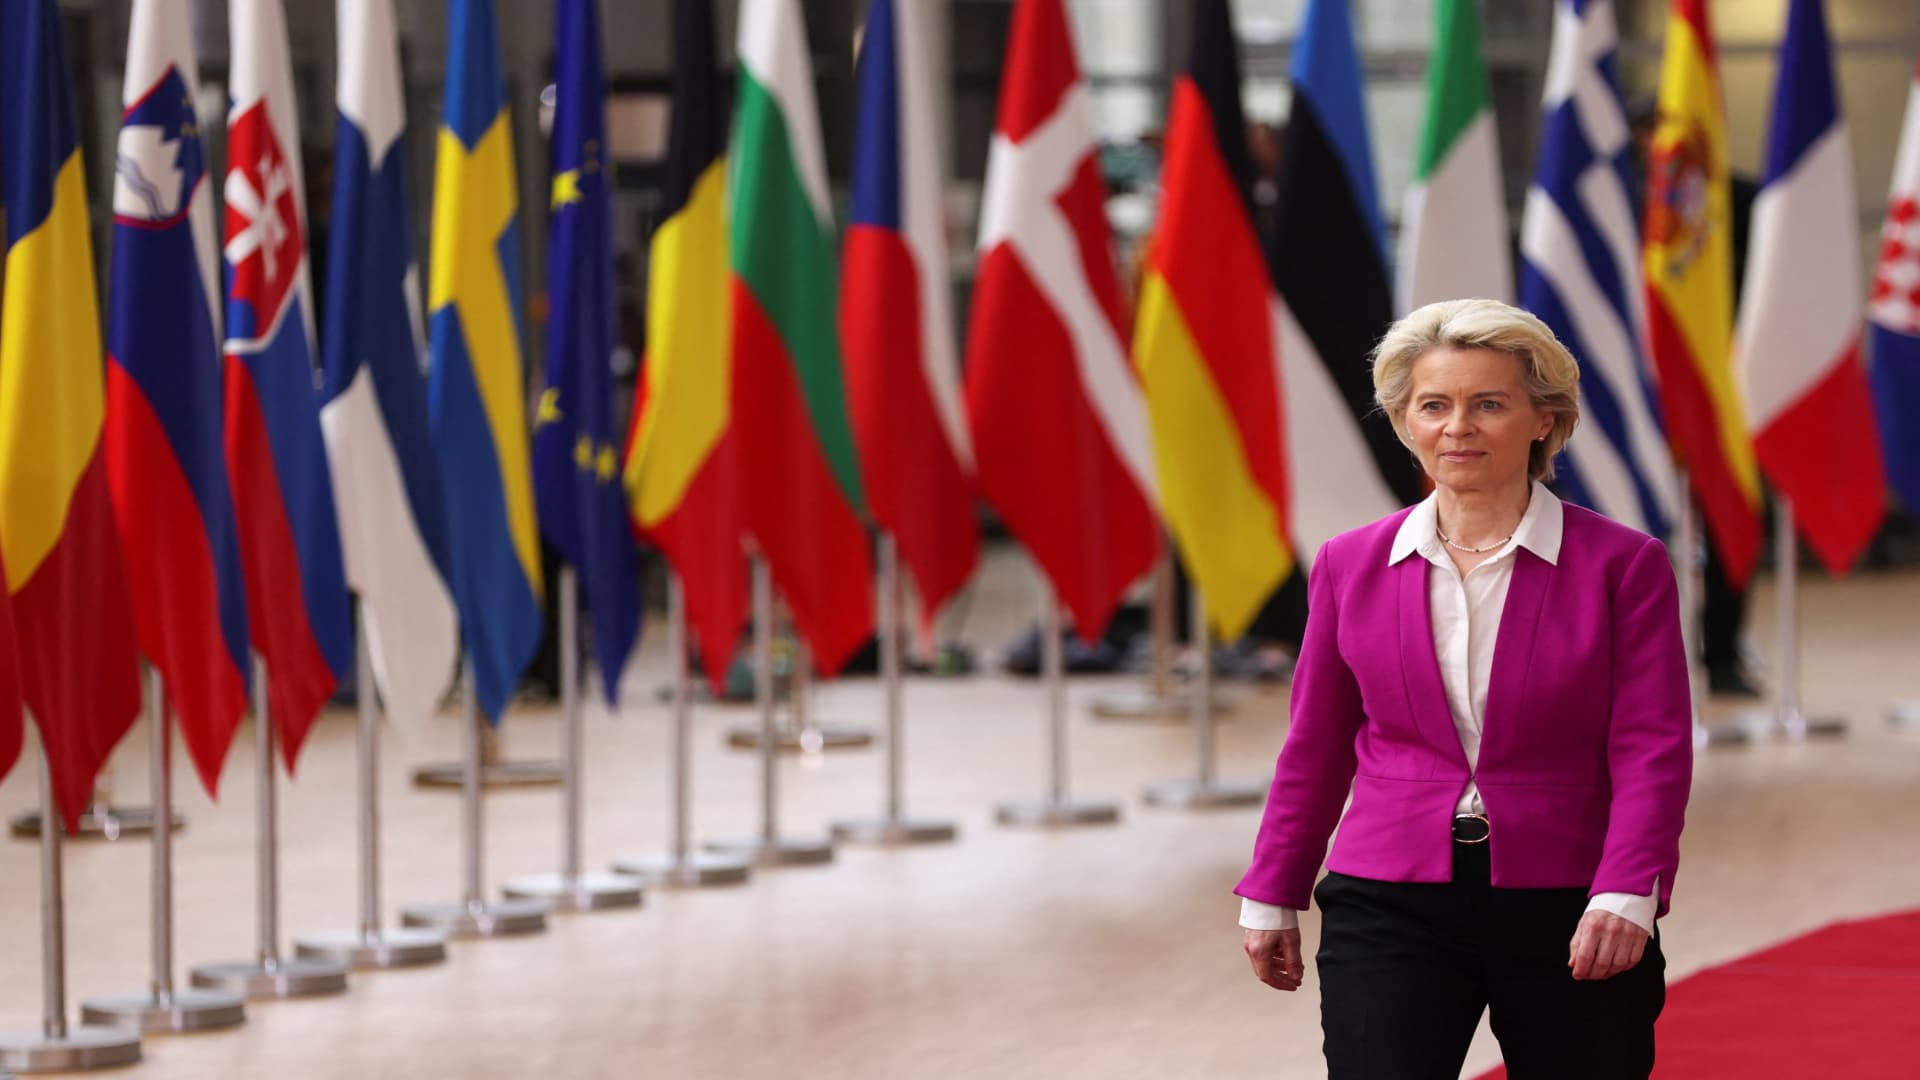 European Commission President Ursula von der Leyen arrives for the European Union leaders summit, as EU's leaders attempt to agree on Russian oil sanctions in response to Russia's invasion of Ukraine, in Brussels, Belgium May 30, 2022. 